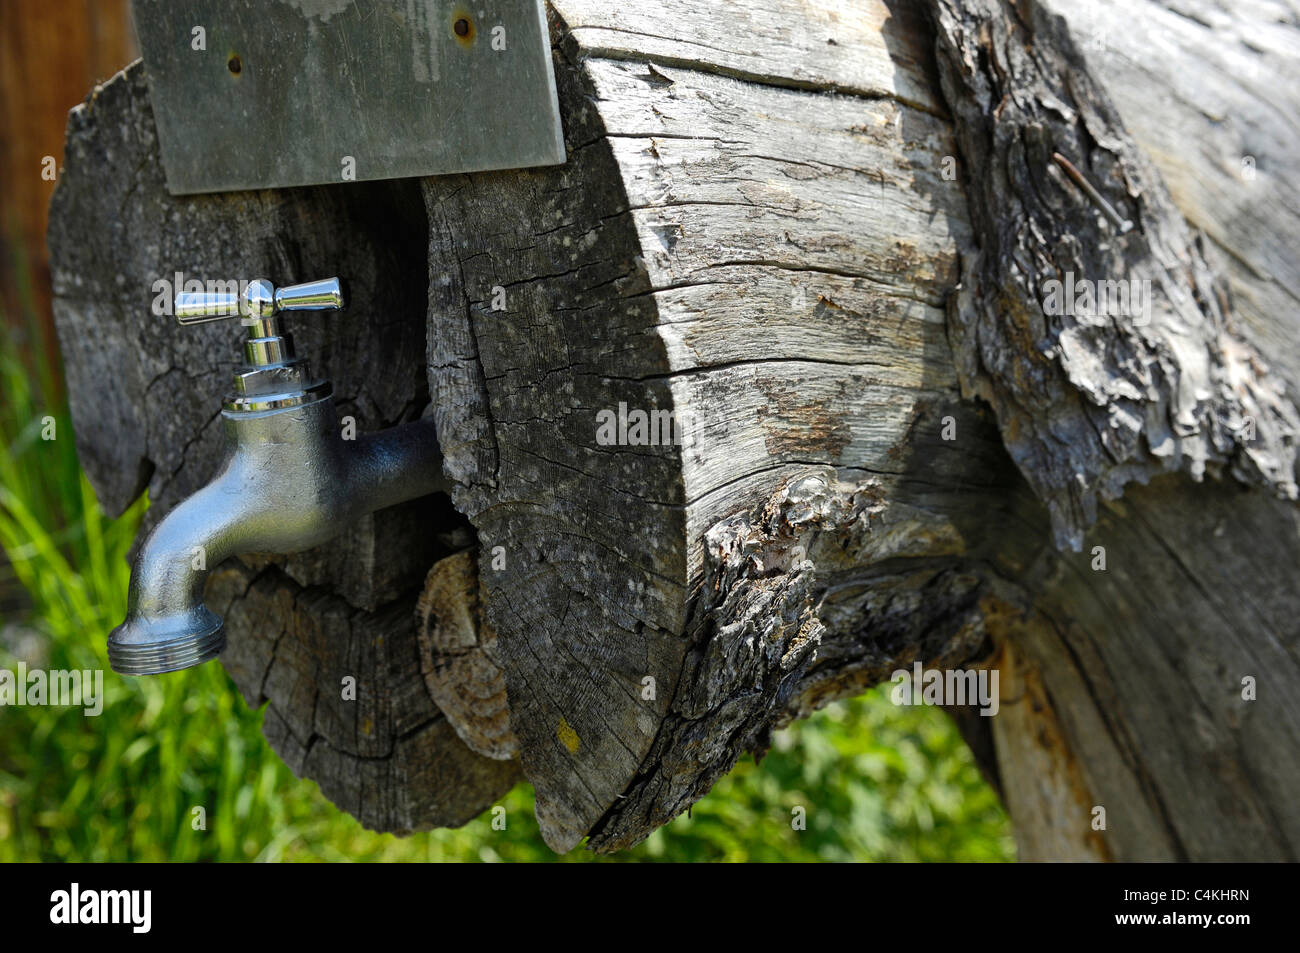 Metal water tap fed from a fresh mountain stream and mounted inside a wooden log. Stock Photo